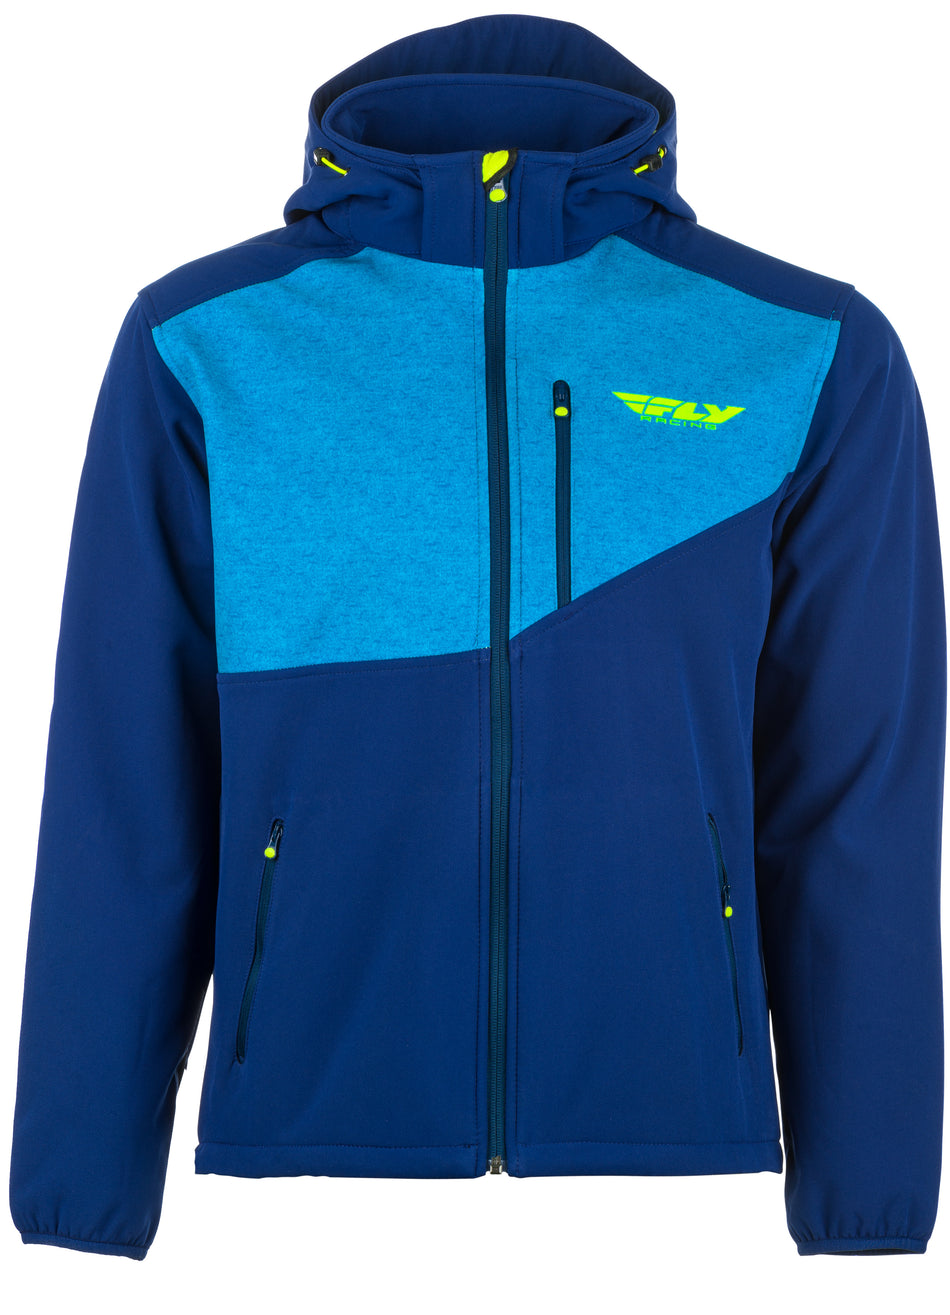 FLY RACING Fly Checkpoint Jacket Blue/Hi-Vis Sm 354-6381S